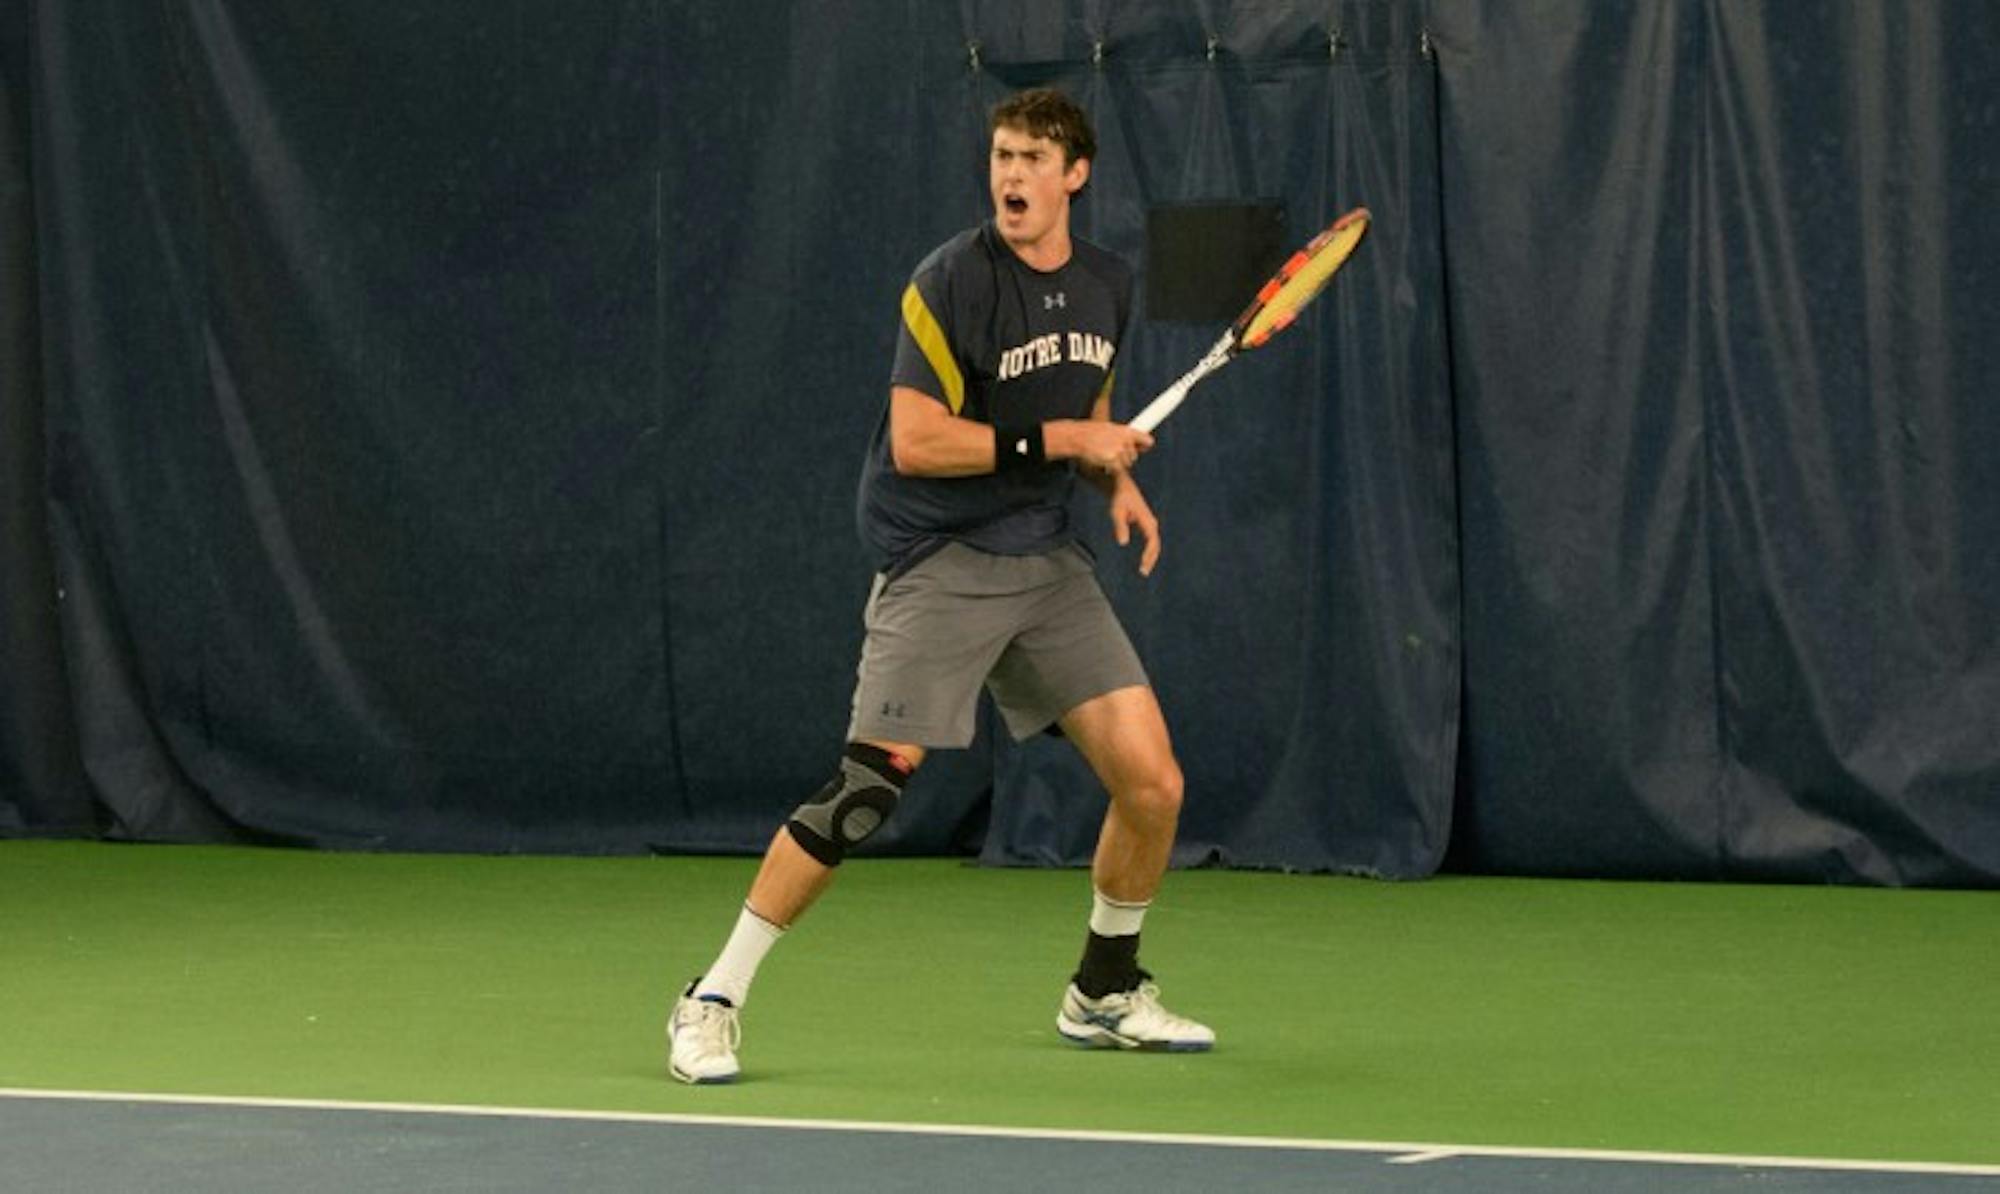 Irish junior Alex Lebedev reacts after scoring a point during a match against Northwestern on Feb. 24 at Eck Tennis Pavilion.